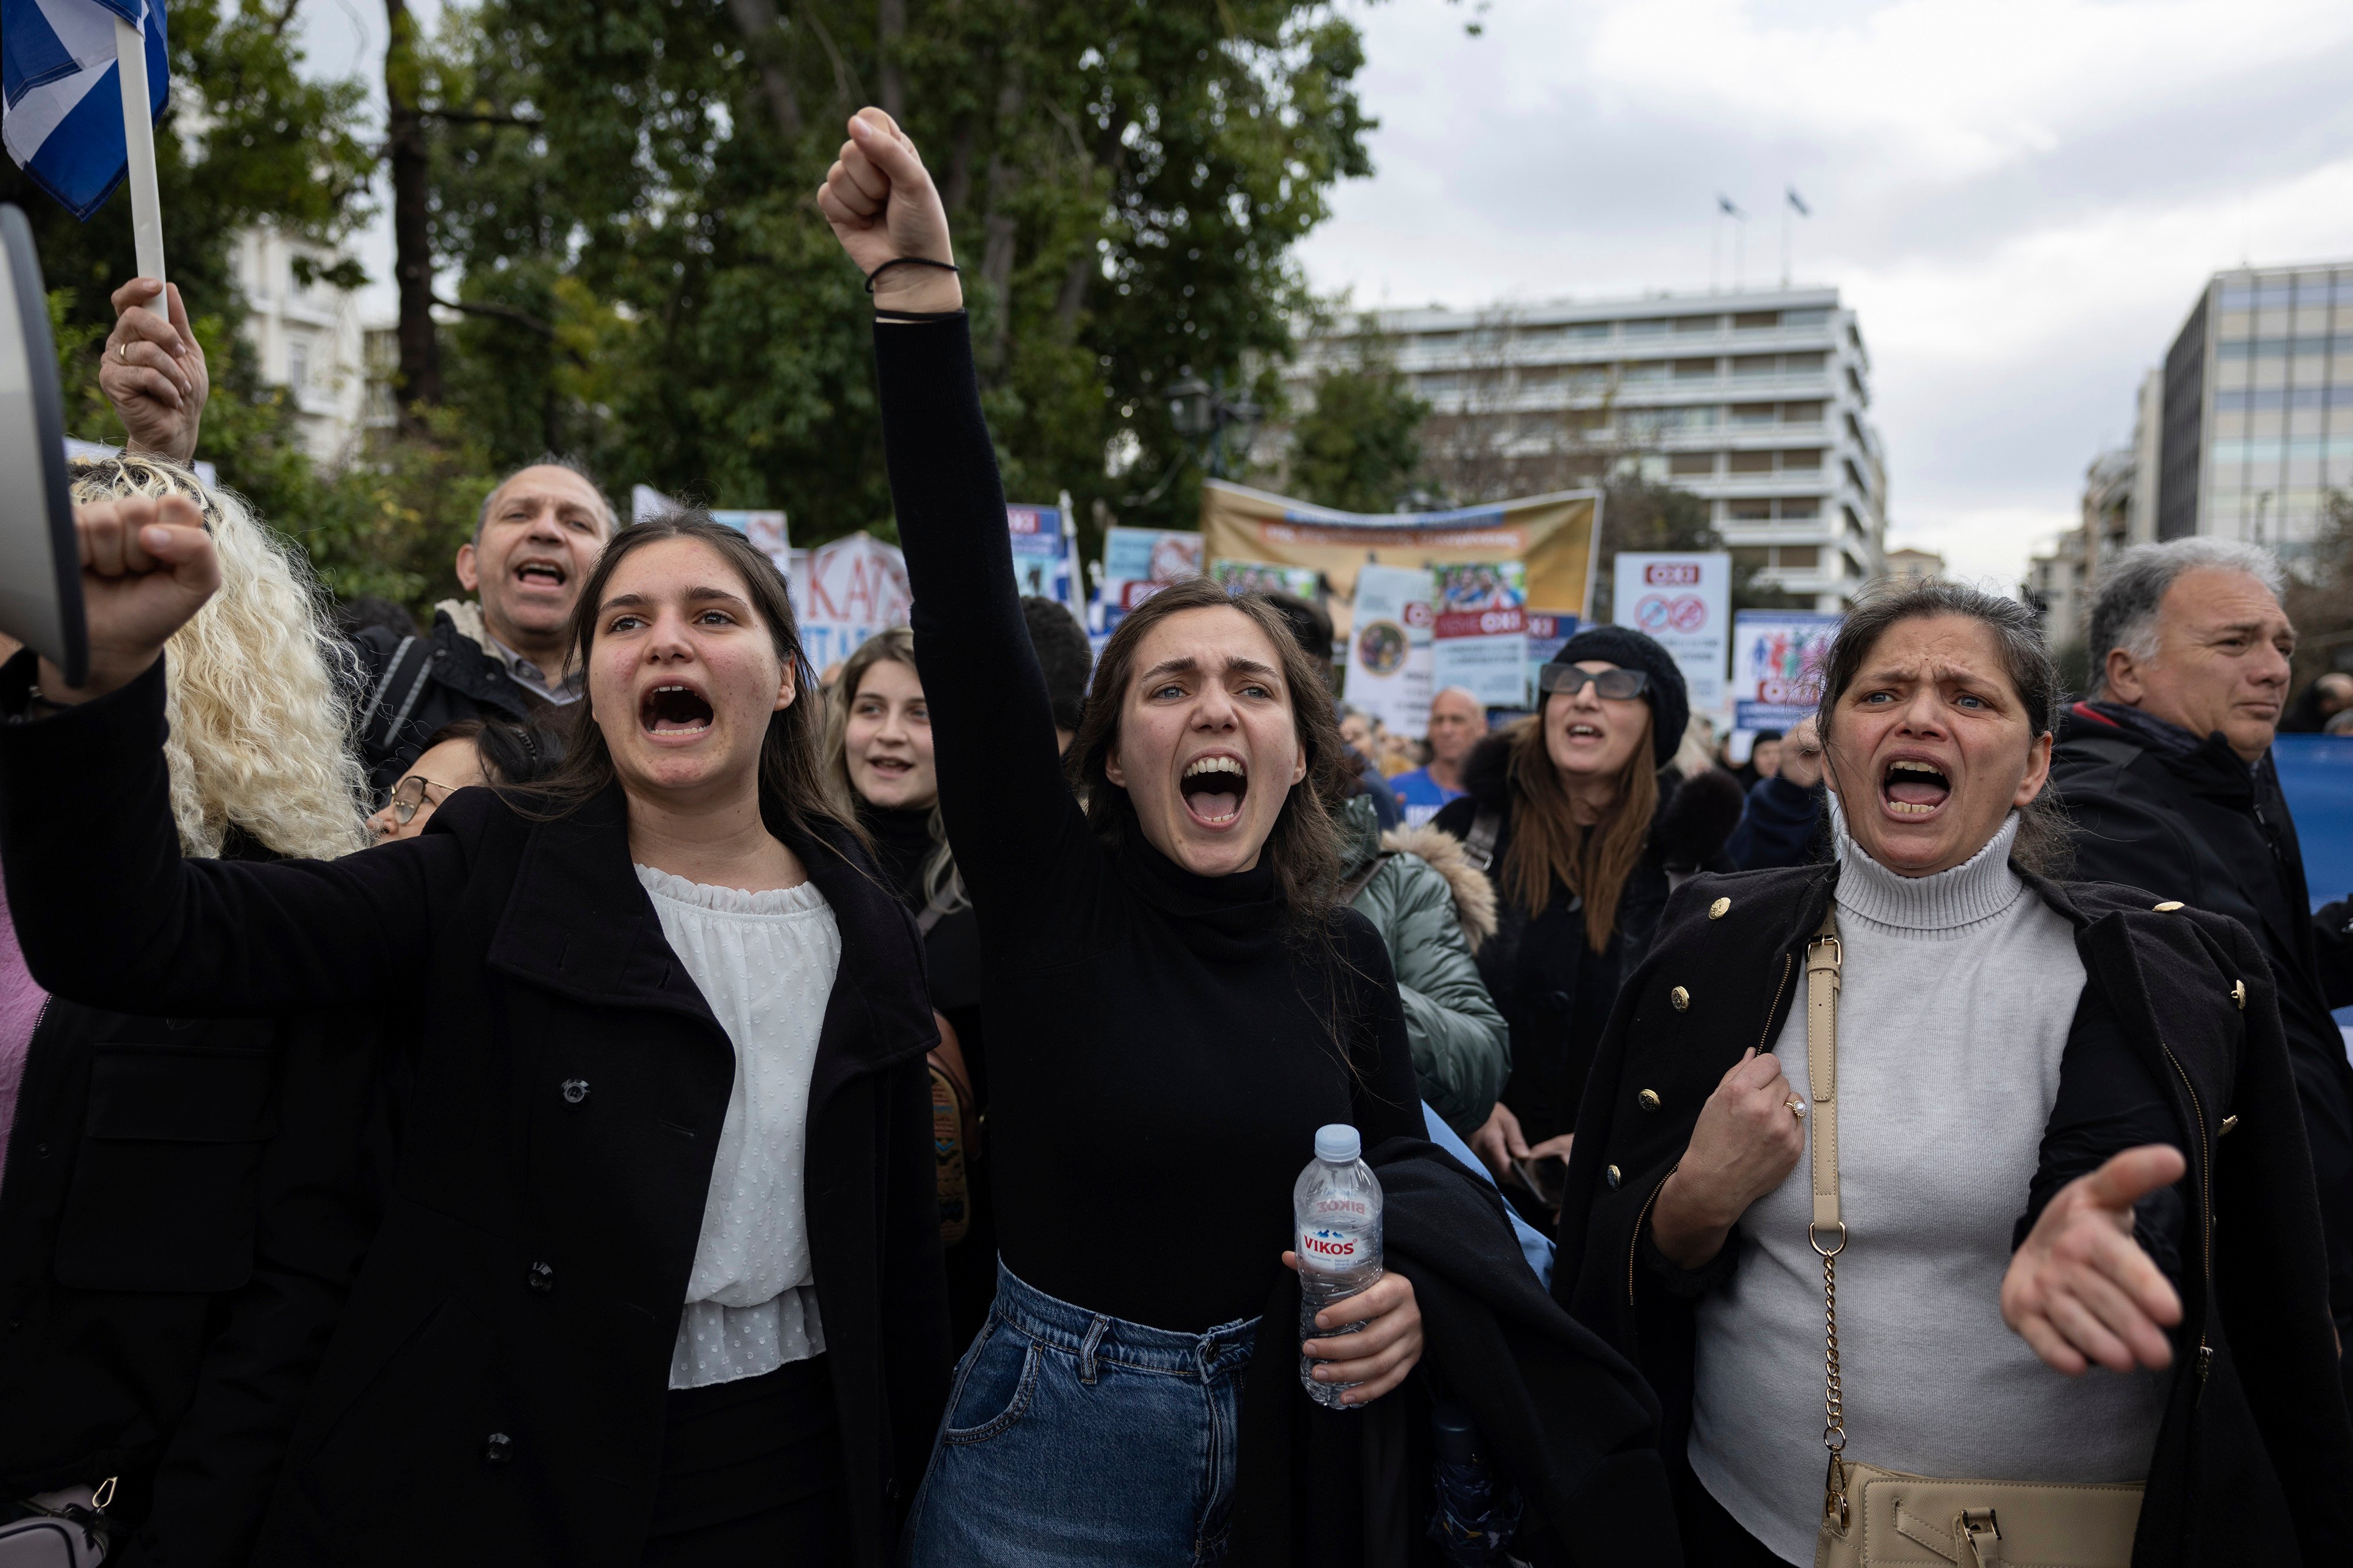 Protesters shout slogans during a rally against same-sex marriage. Greece had been condemned for anti-gay discrimination by the European Court of Human Rights in 2013, after gay couples were excluded from a prior civil unions law in 2008. Photo: AP